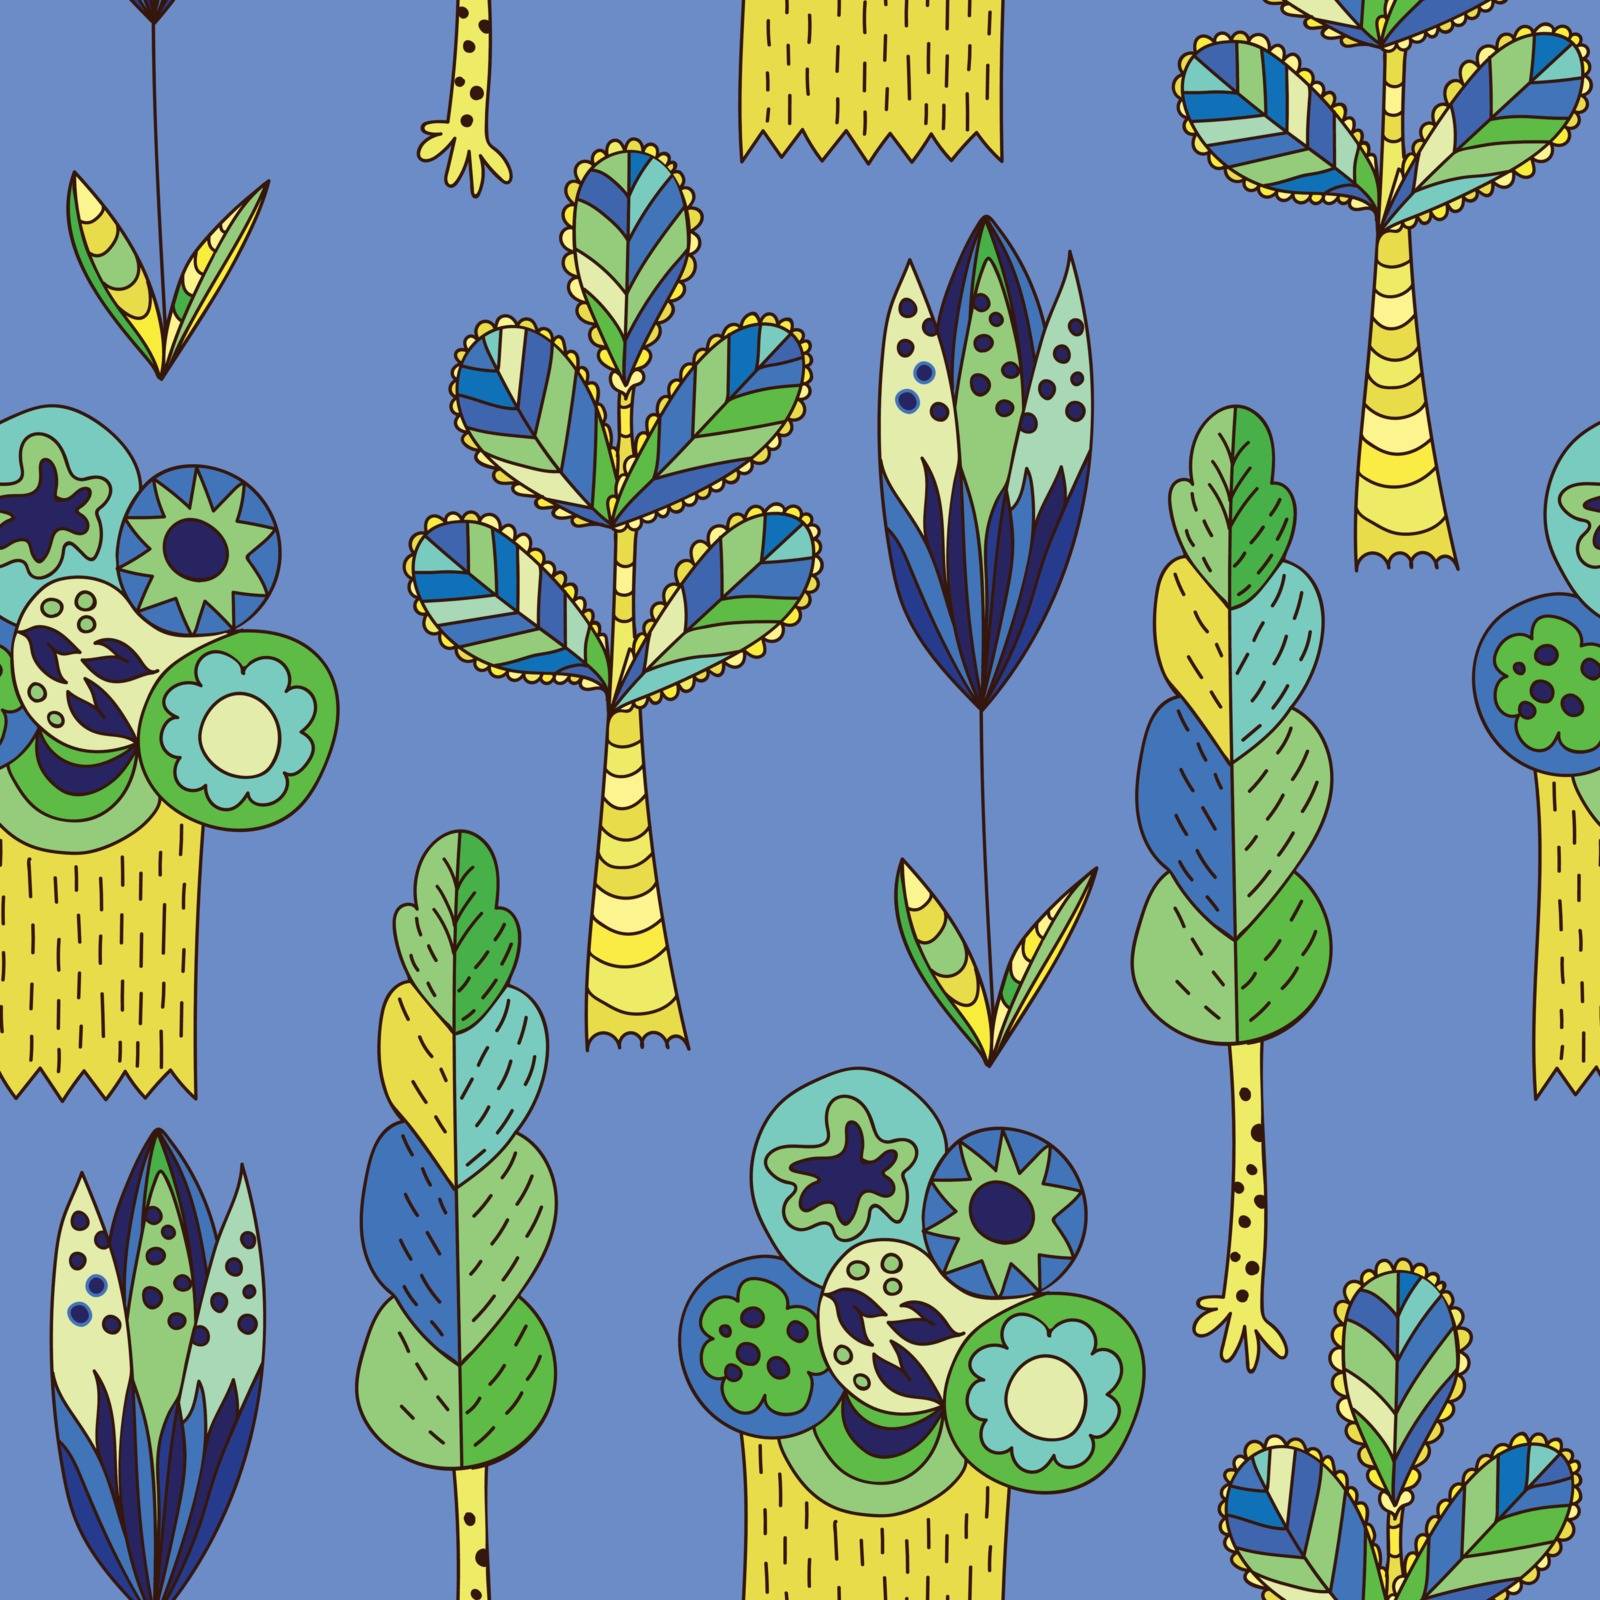 Cartoon forest illustration for baby wallpaper and textile design